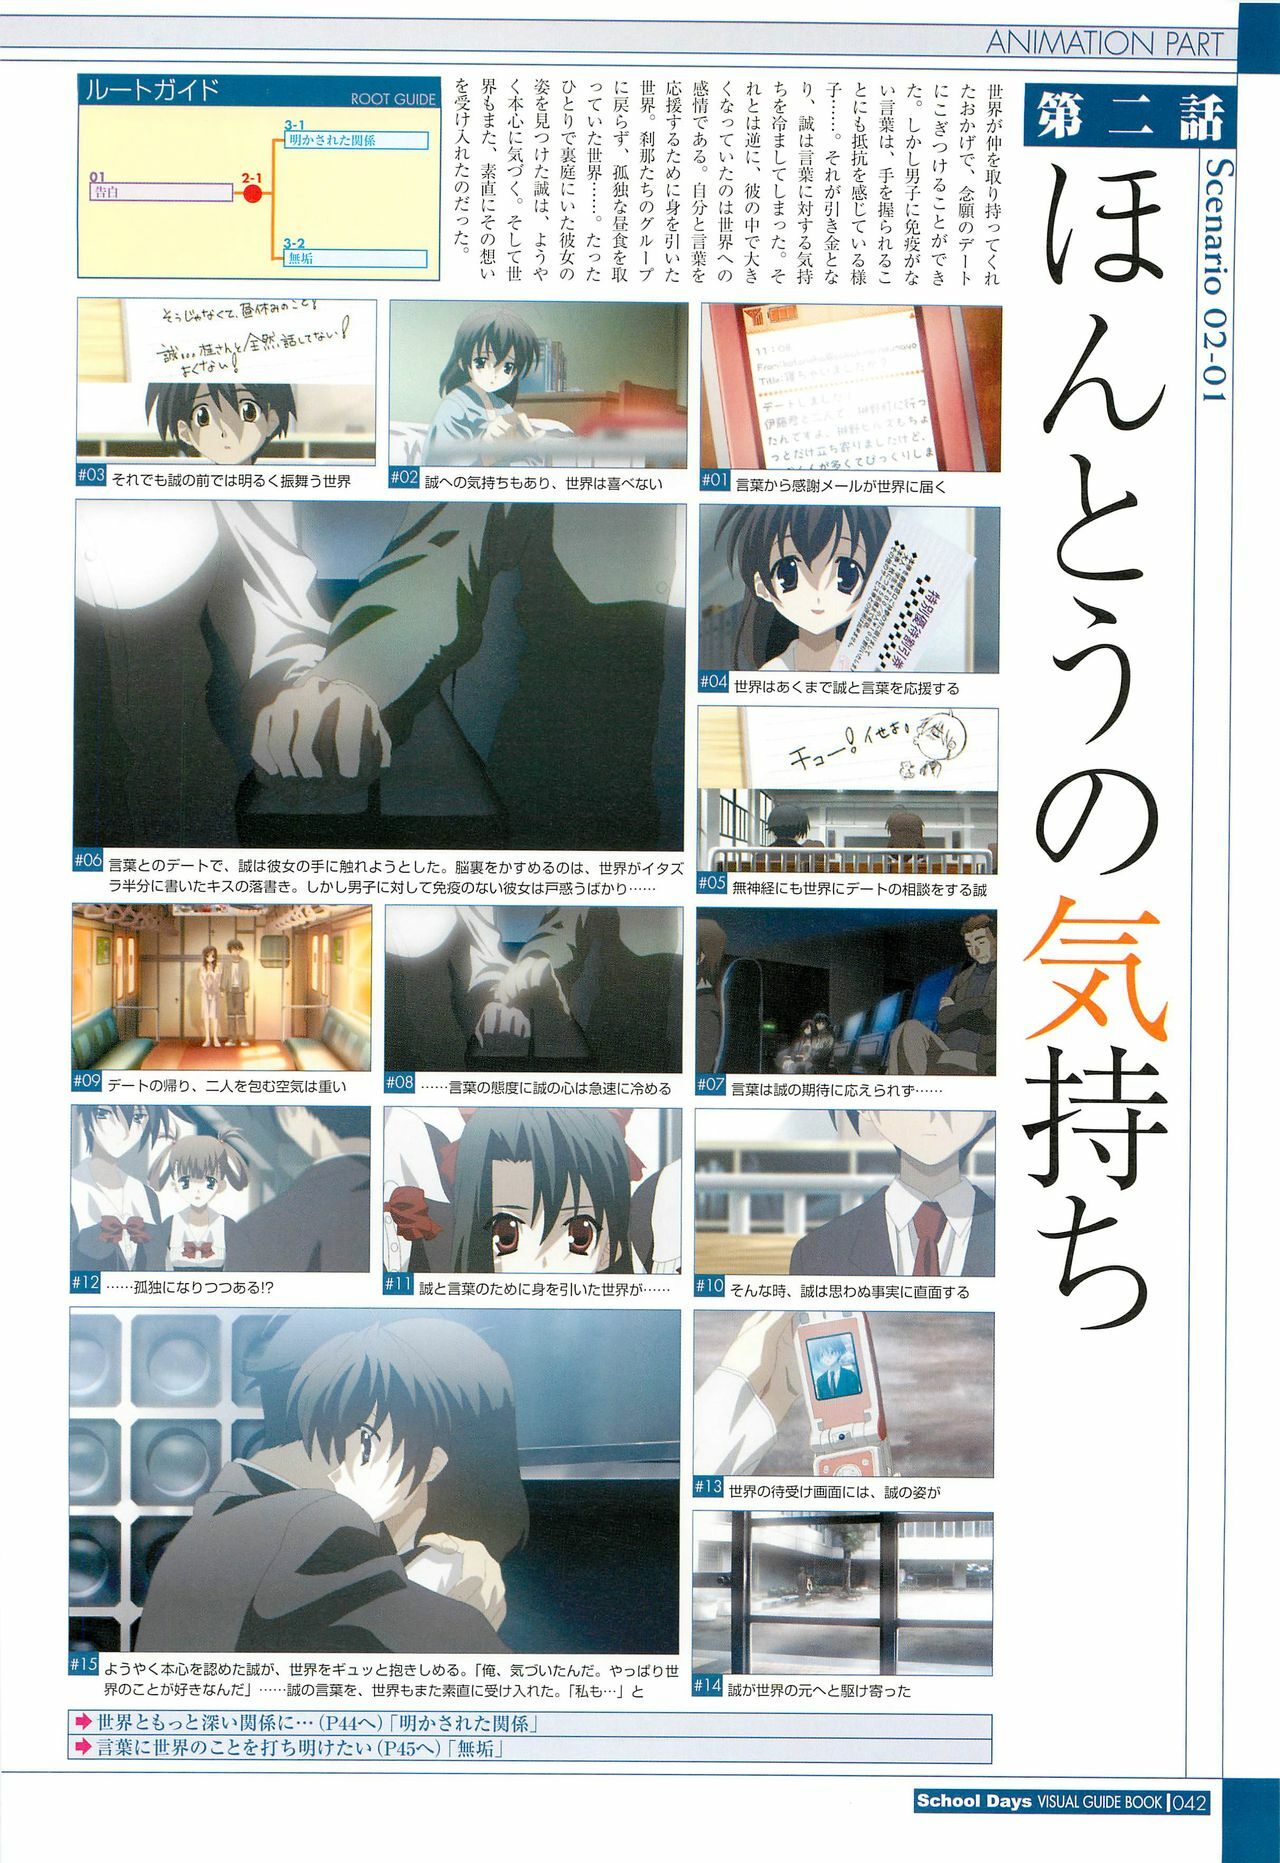 School Days Visual Guide Book page 44 full